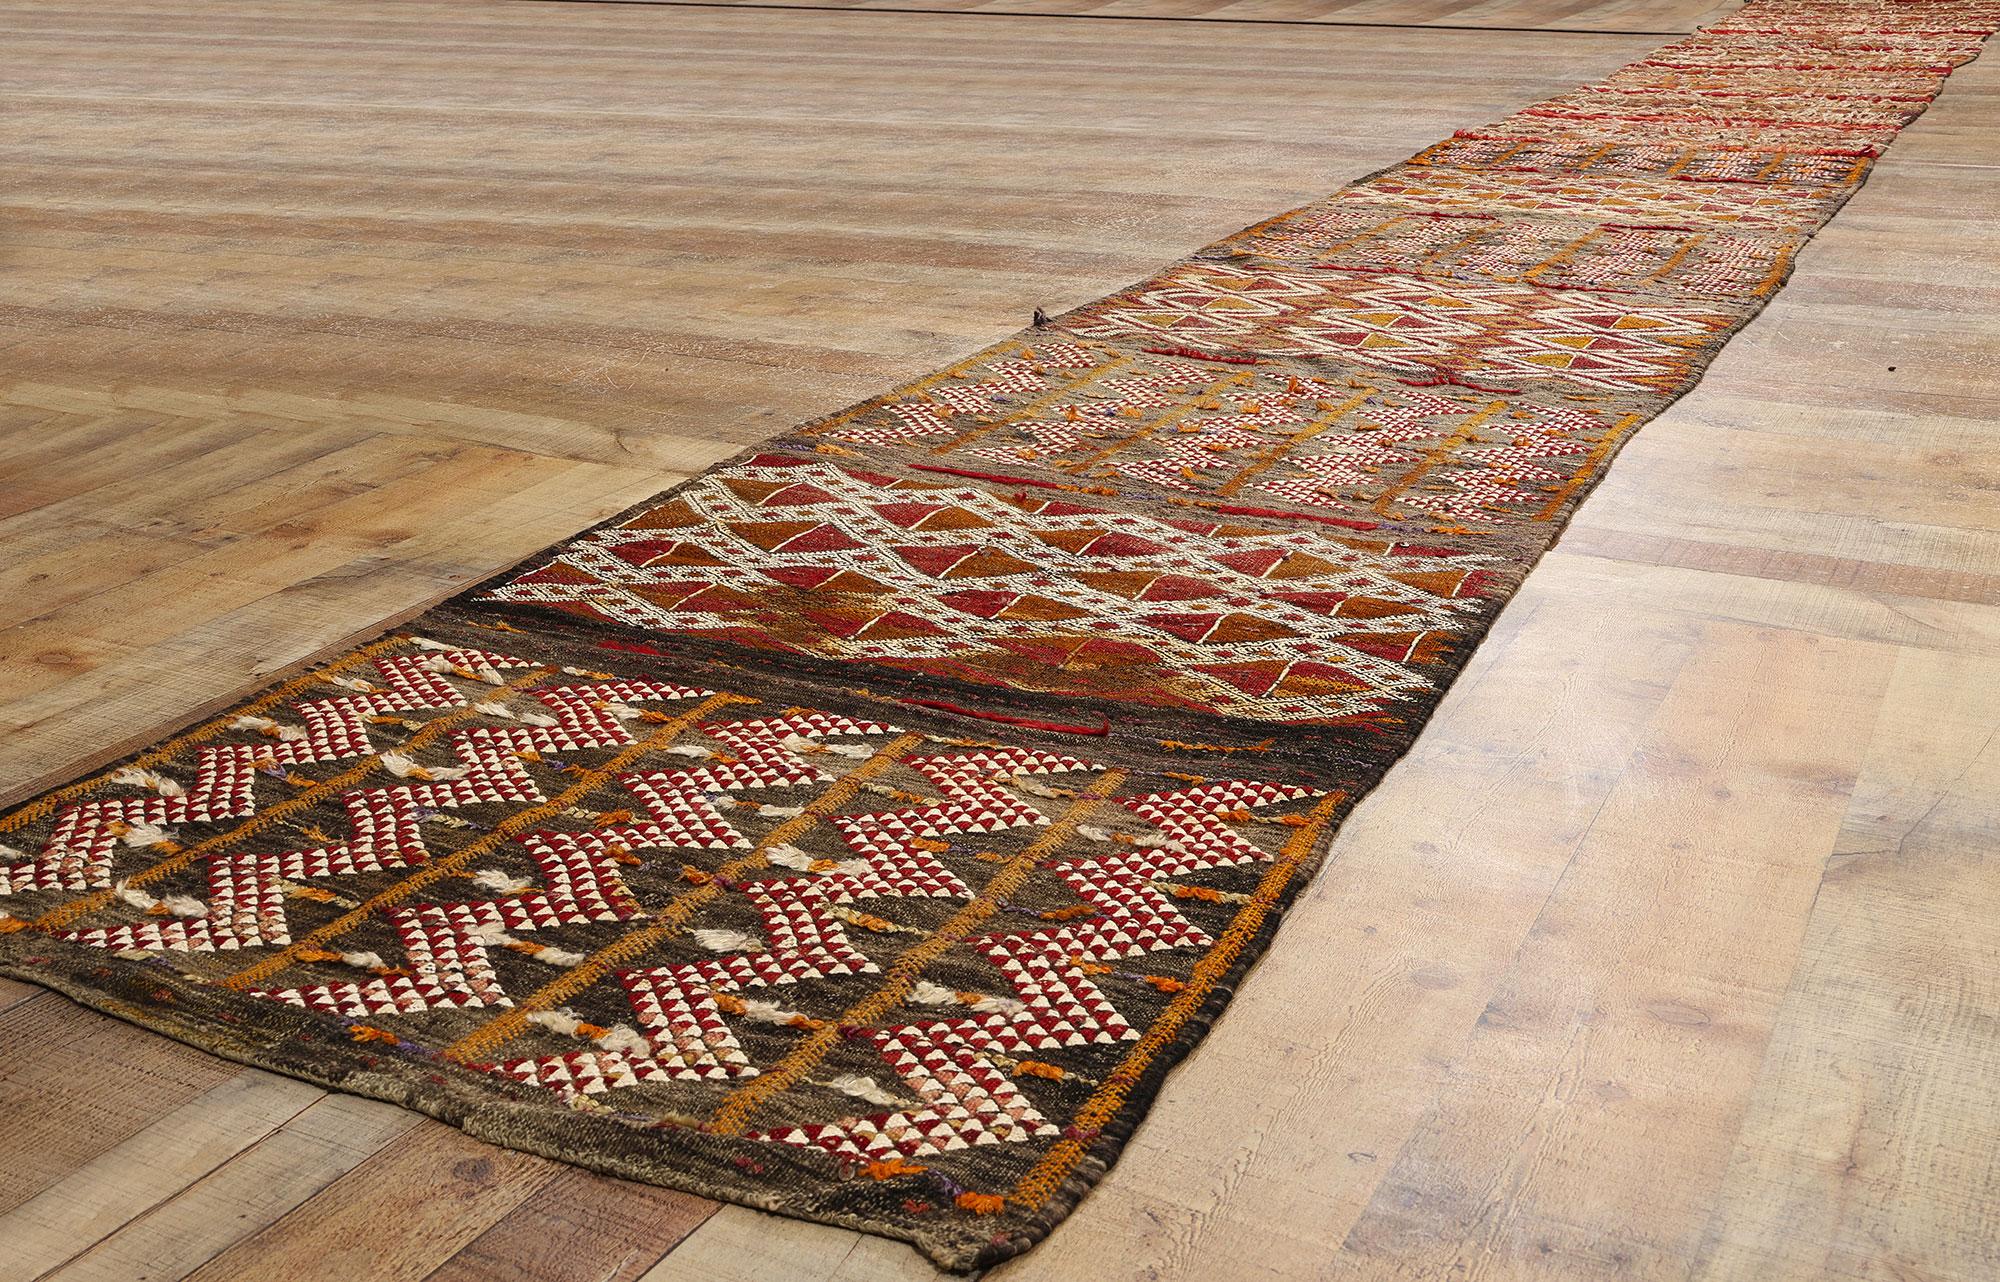 Hand-Woven Midcentury Bohemian Vintage Moroccan Zemmour Kilim Berber Rug, 02'07 x 23'02 For Sale